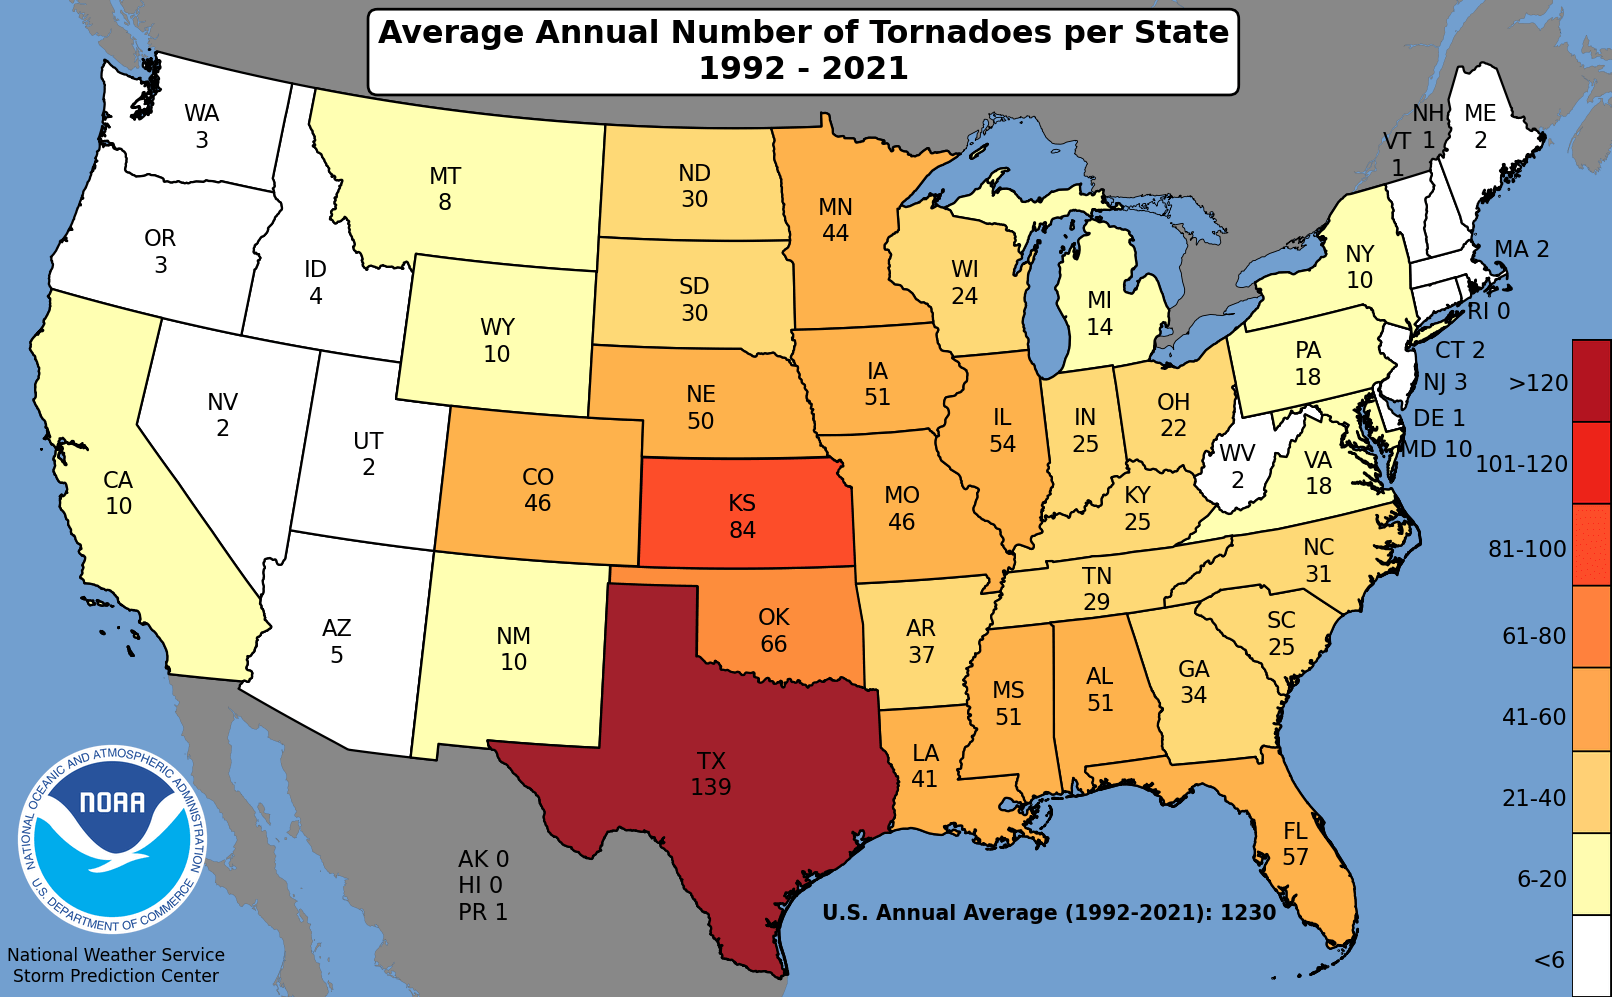 NOAA chart showing the average annual number of tornadoes per state from 1992 - 2021.